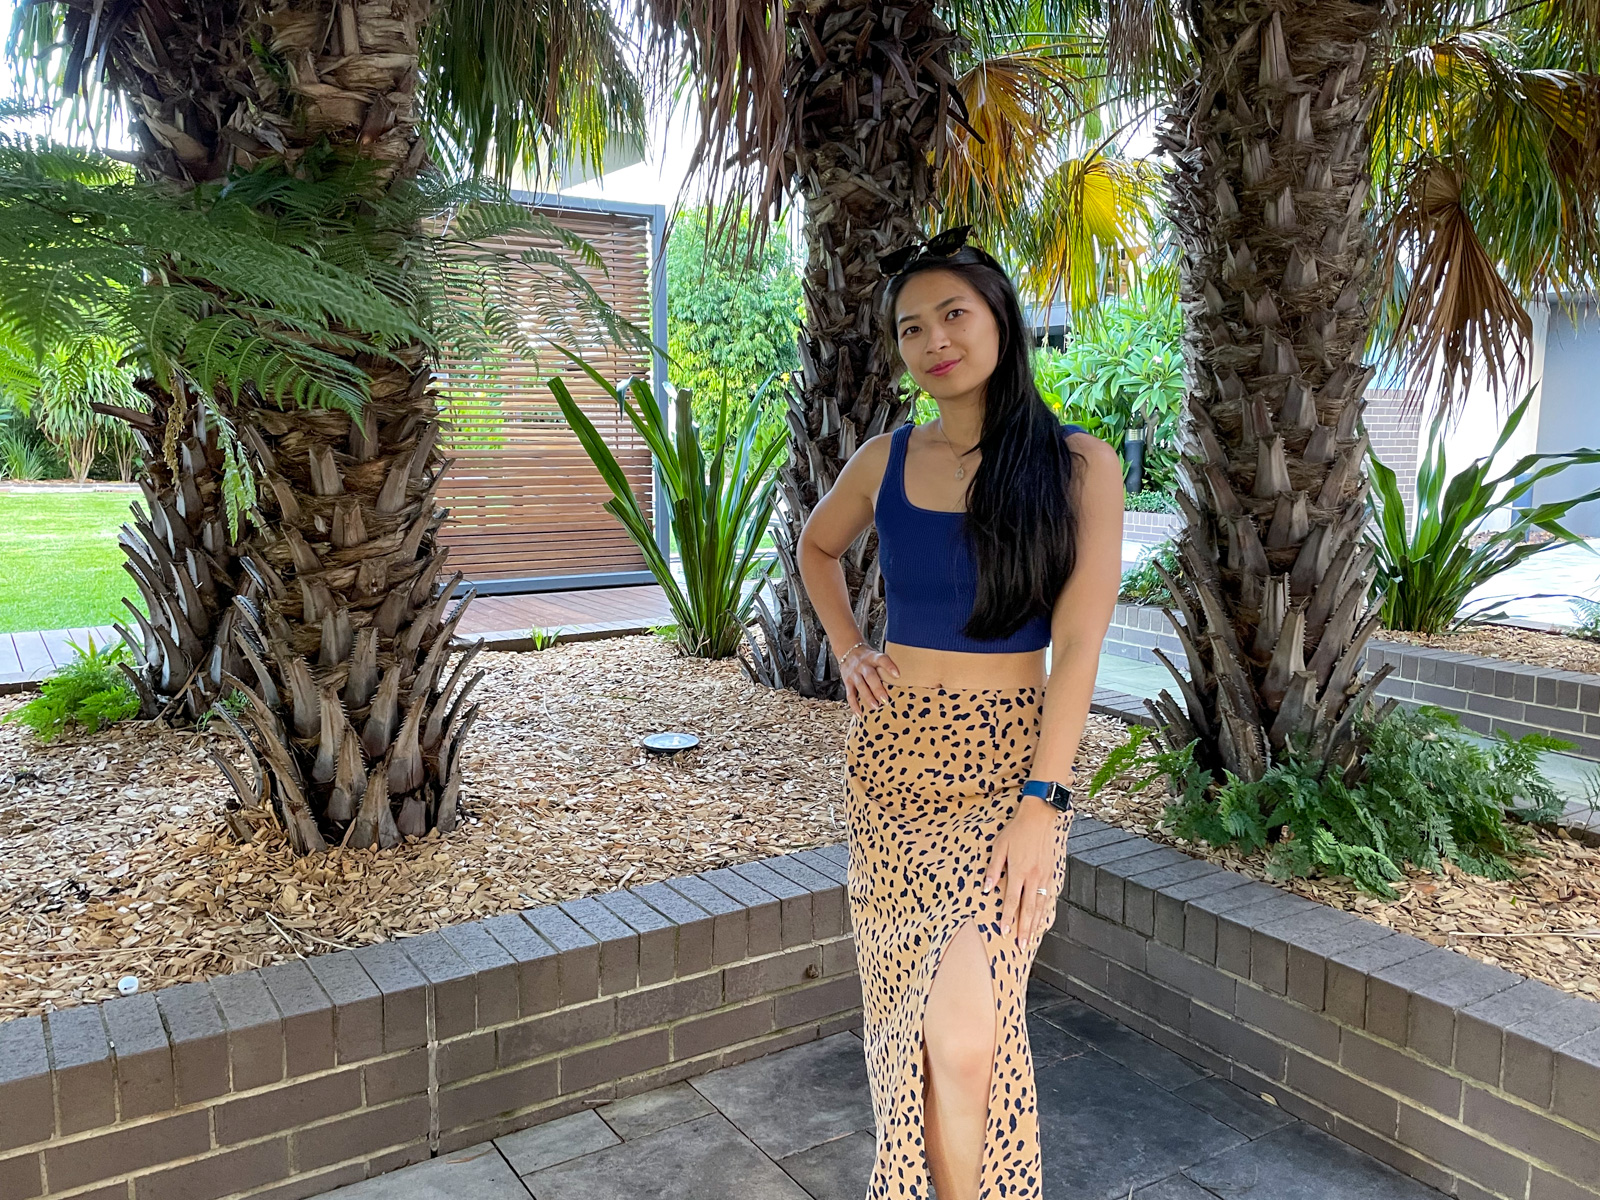 An Asian woman with long dark hair, wearing a long tan coloured midi skirt with a dark animal print, and a fitted blue top. She has a hand on her hip and sunglasses on top of her head. She is standing on concrete tiles and in the background are some planted trees.